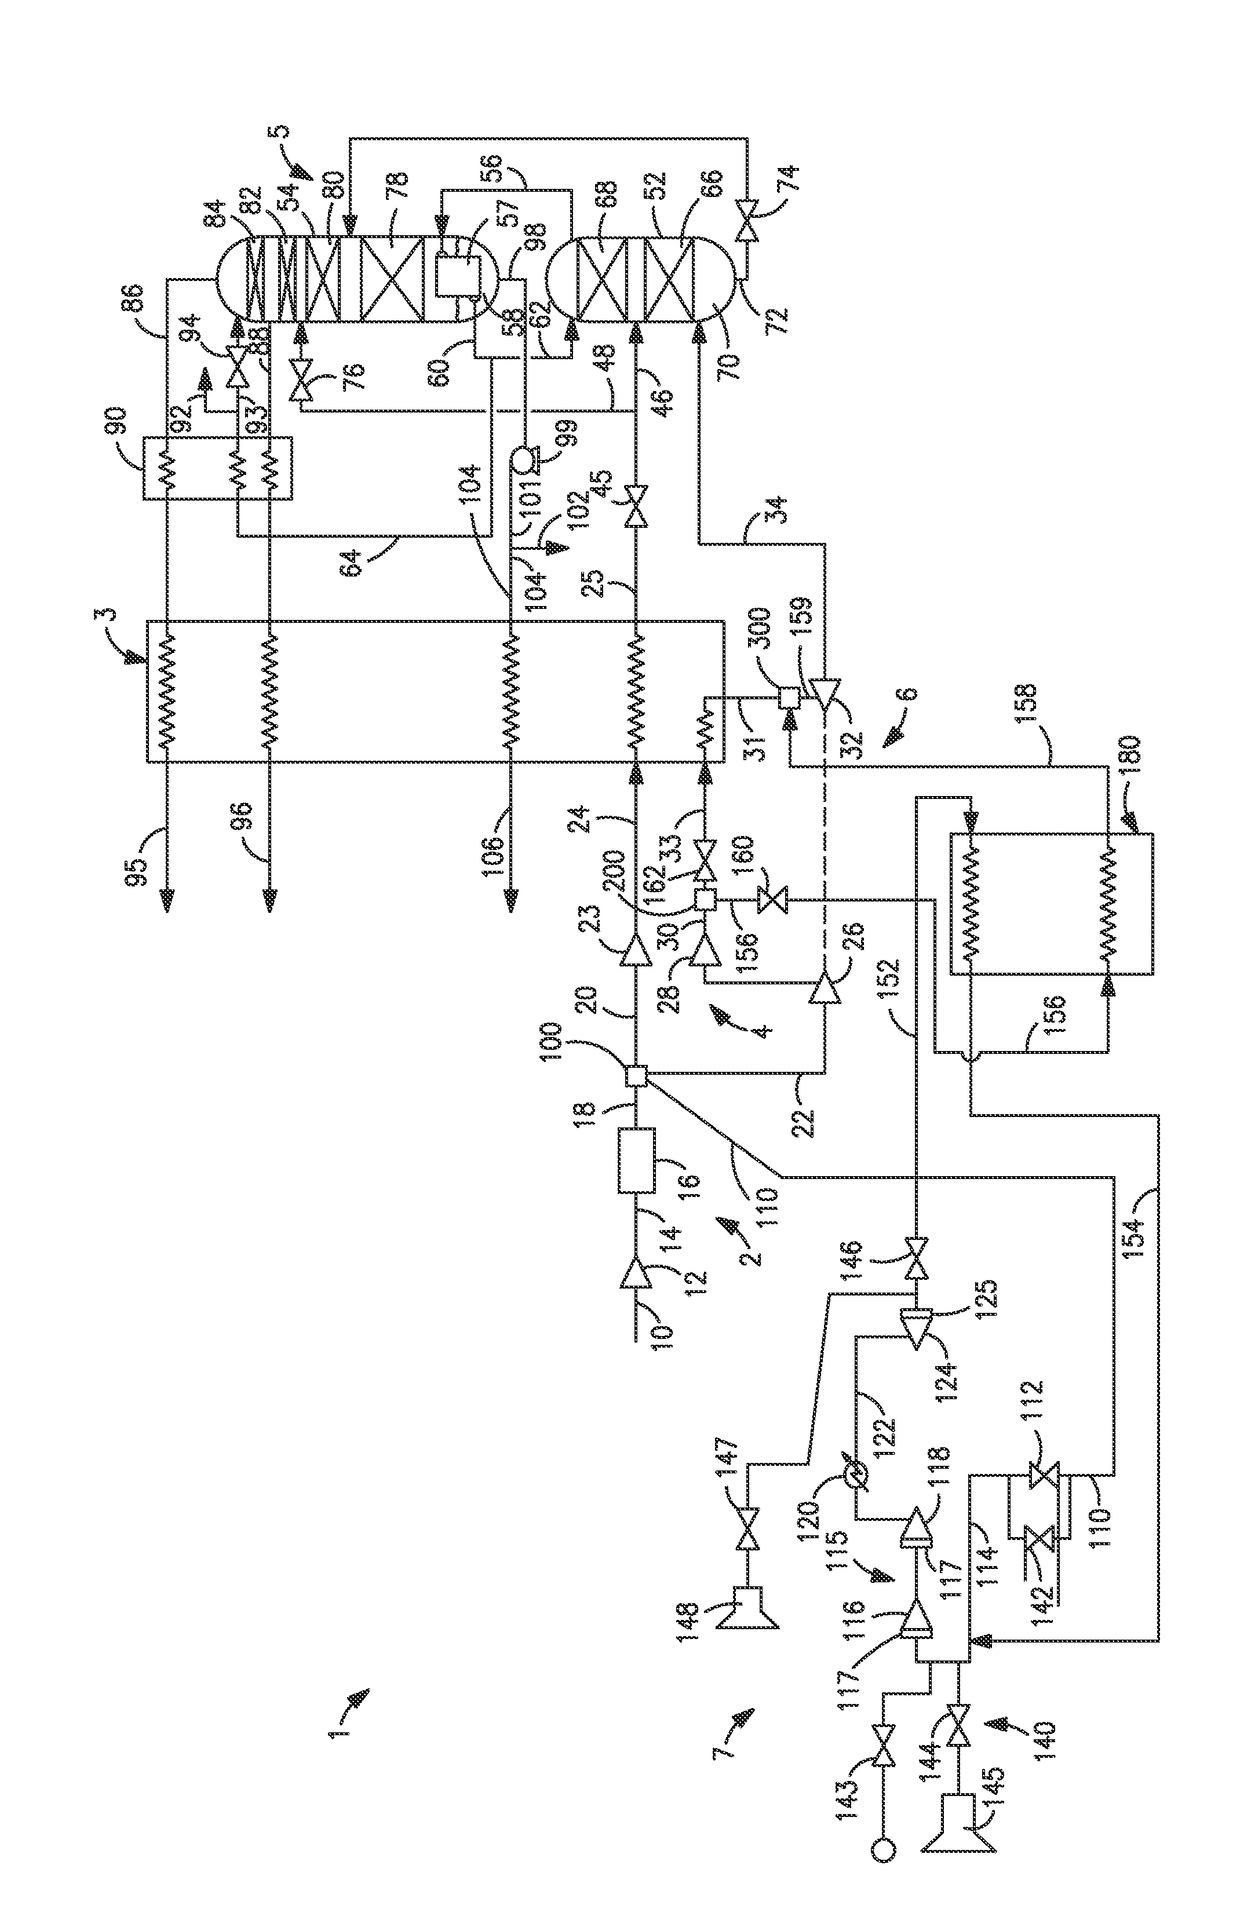 Method and system for providing supplemental refrigeration to an air separation plant